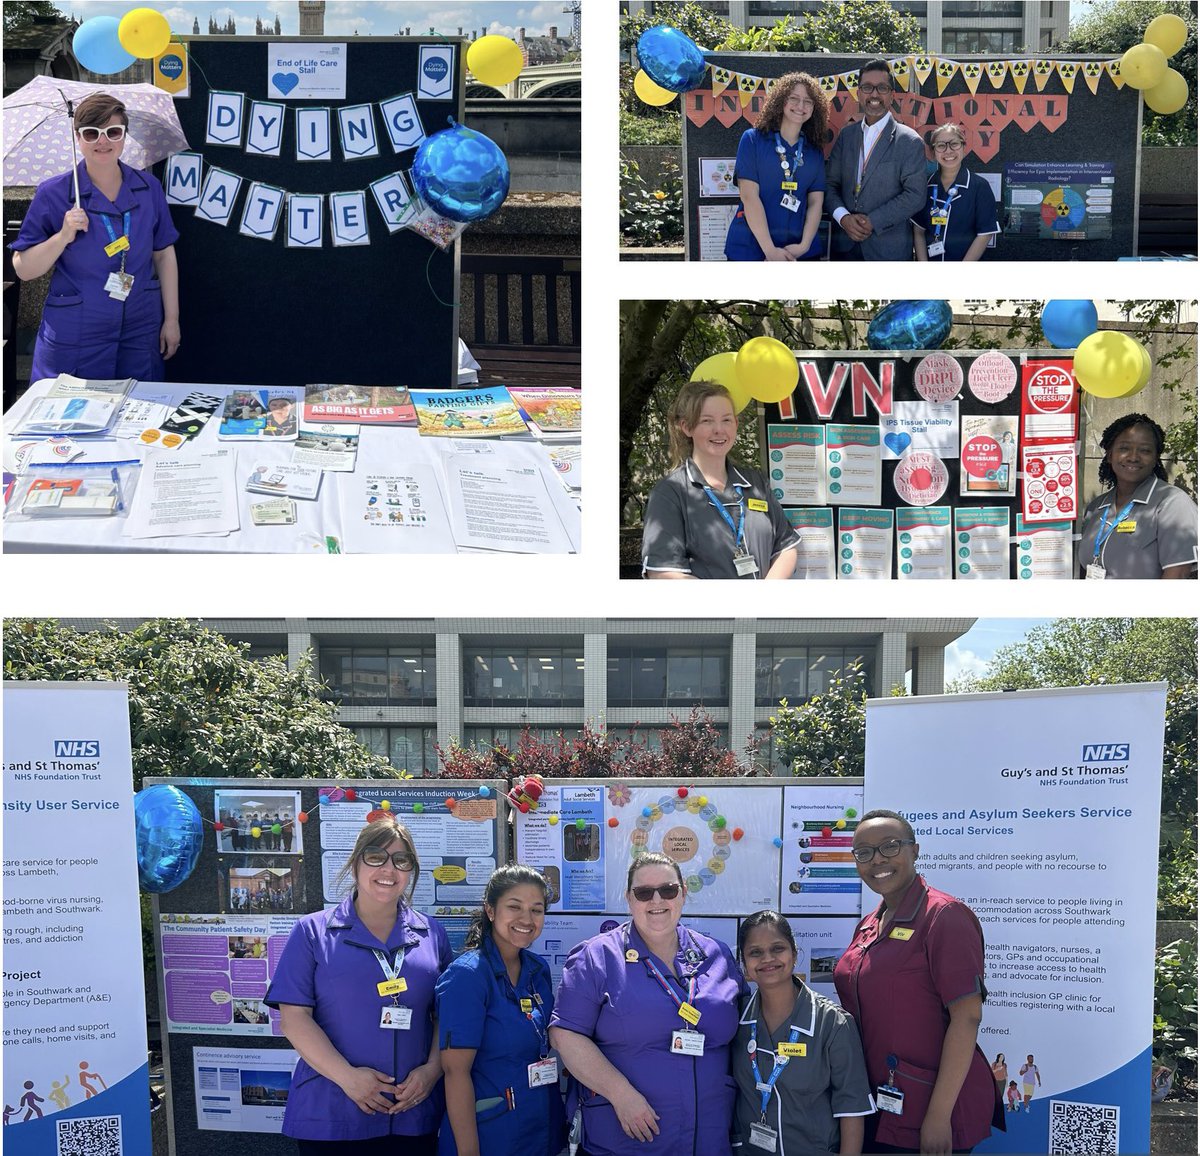 Nursing and midwifery week celebrations 💫Great engagement and networking at the exhibition of the varied nursing specialty teams @GSTTnhs 💫 #TeamGSTT